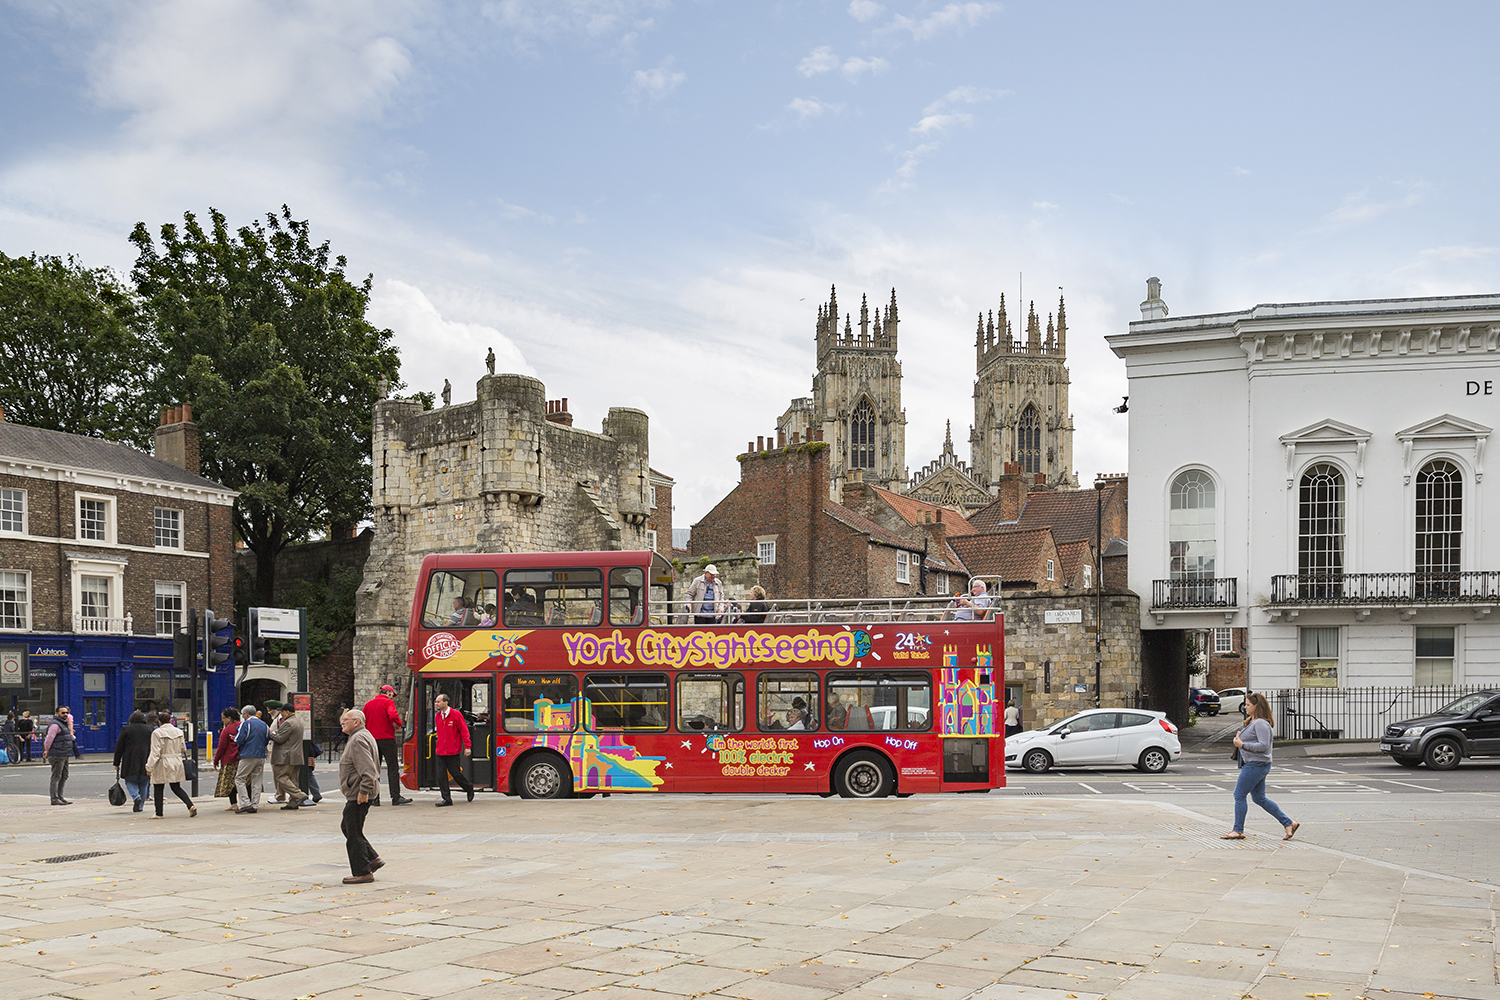 Image name sightseeing bus york feature the 1 image from the post 5% off on Yorkshire activities for Father's Day with Tiqets in Yorkshire.com.